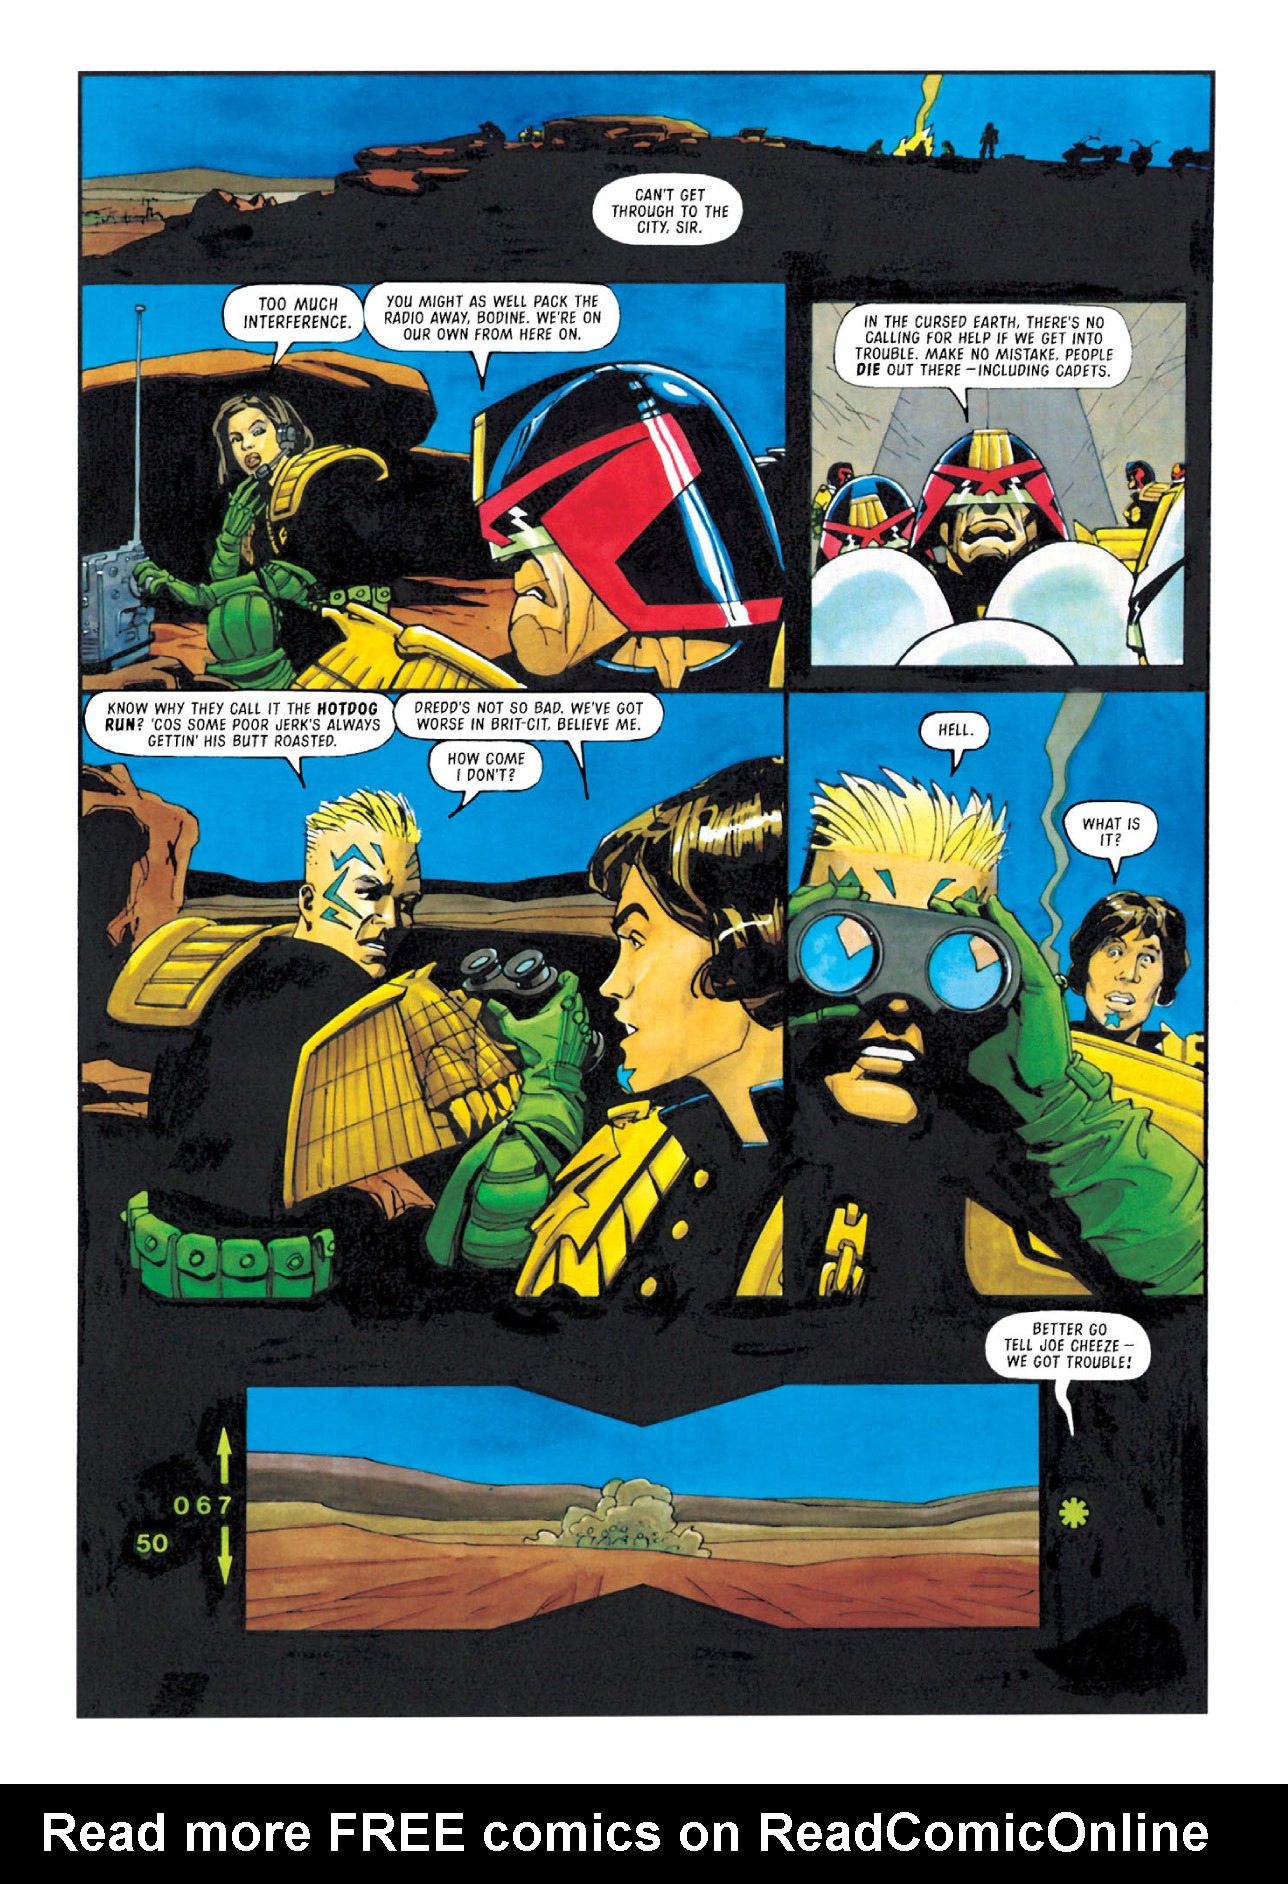 Read online Judge Dredd: The Complete Case Files comic -  Issue # TPB 26 - 42